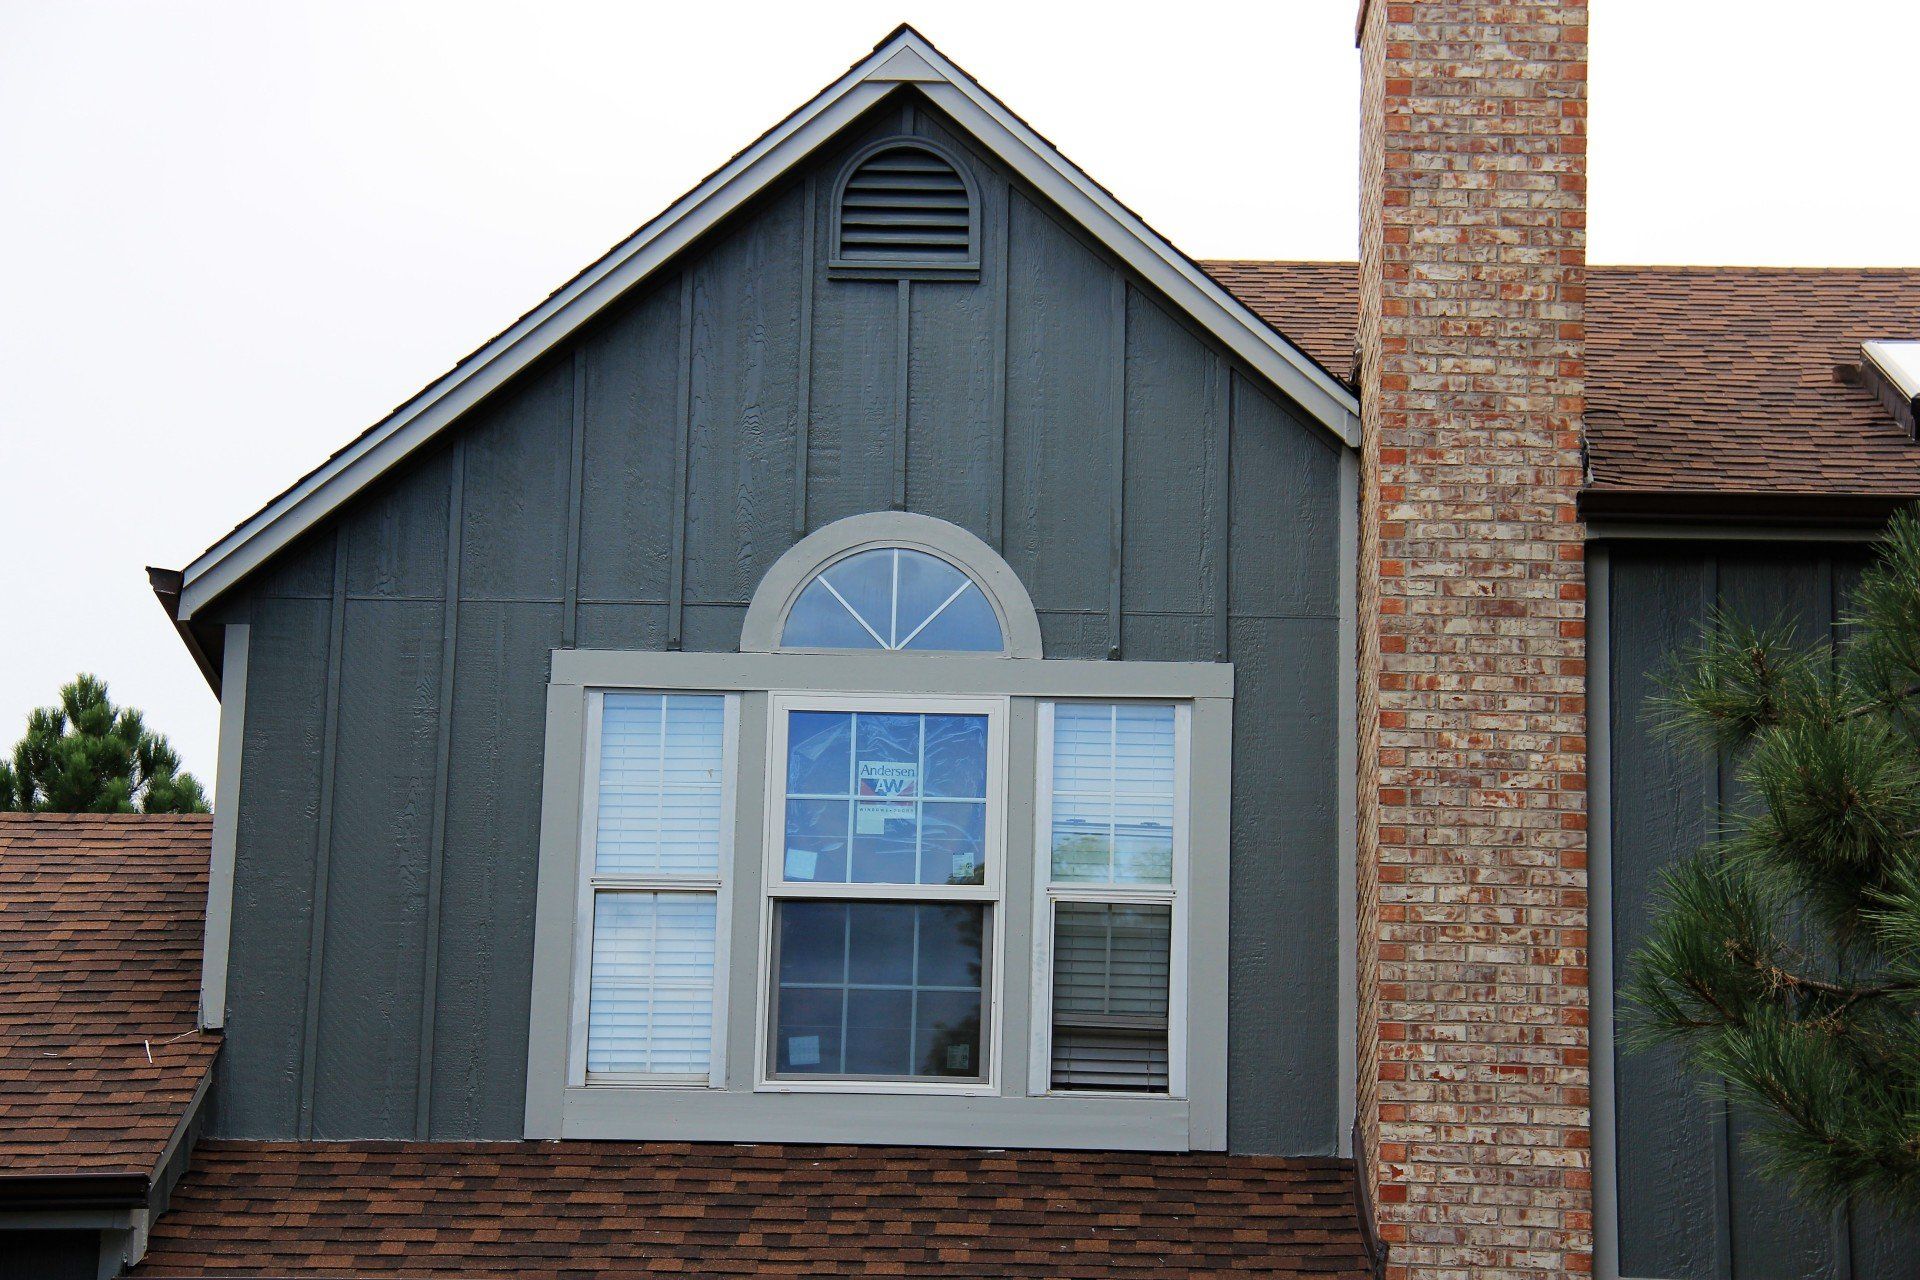 Check out our completed window and siding project (view is of front of residence, second story).